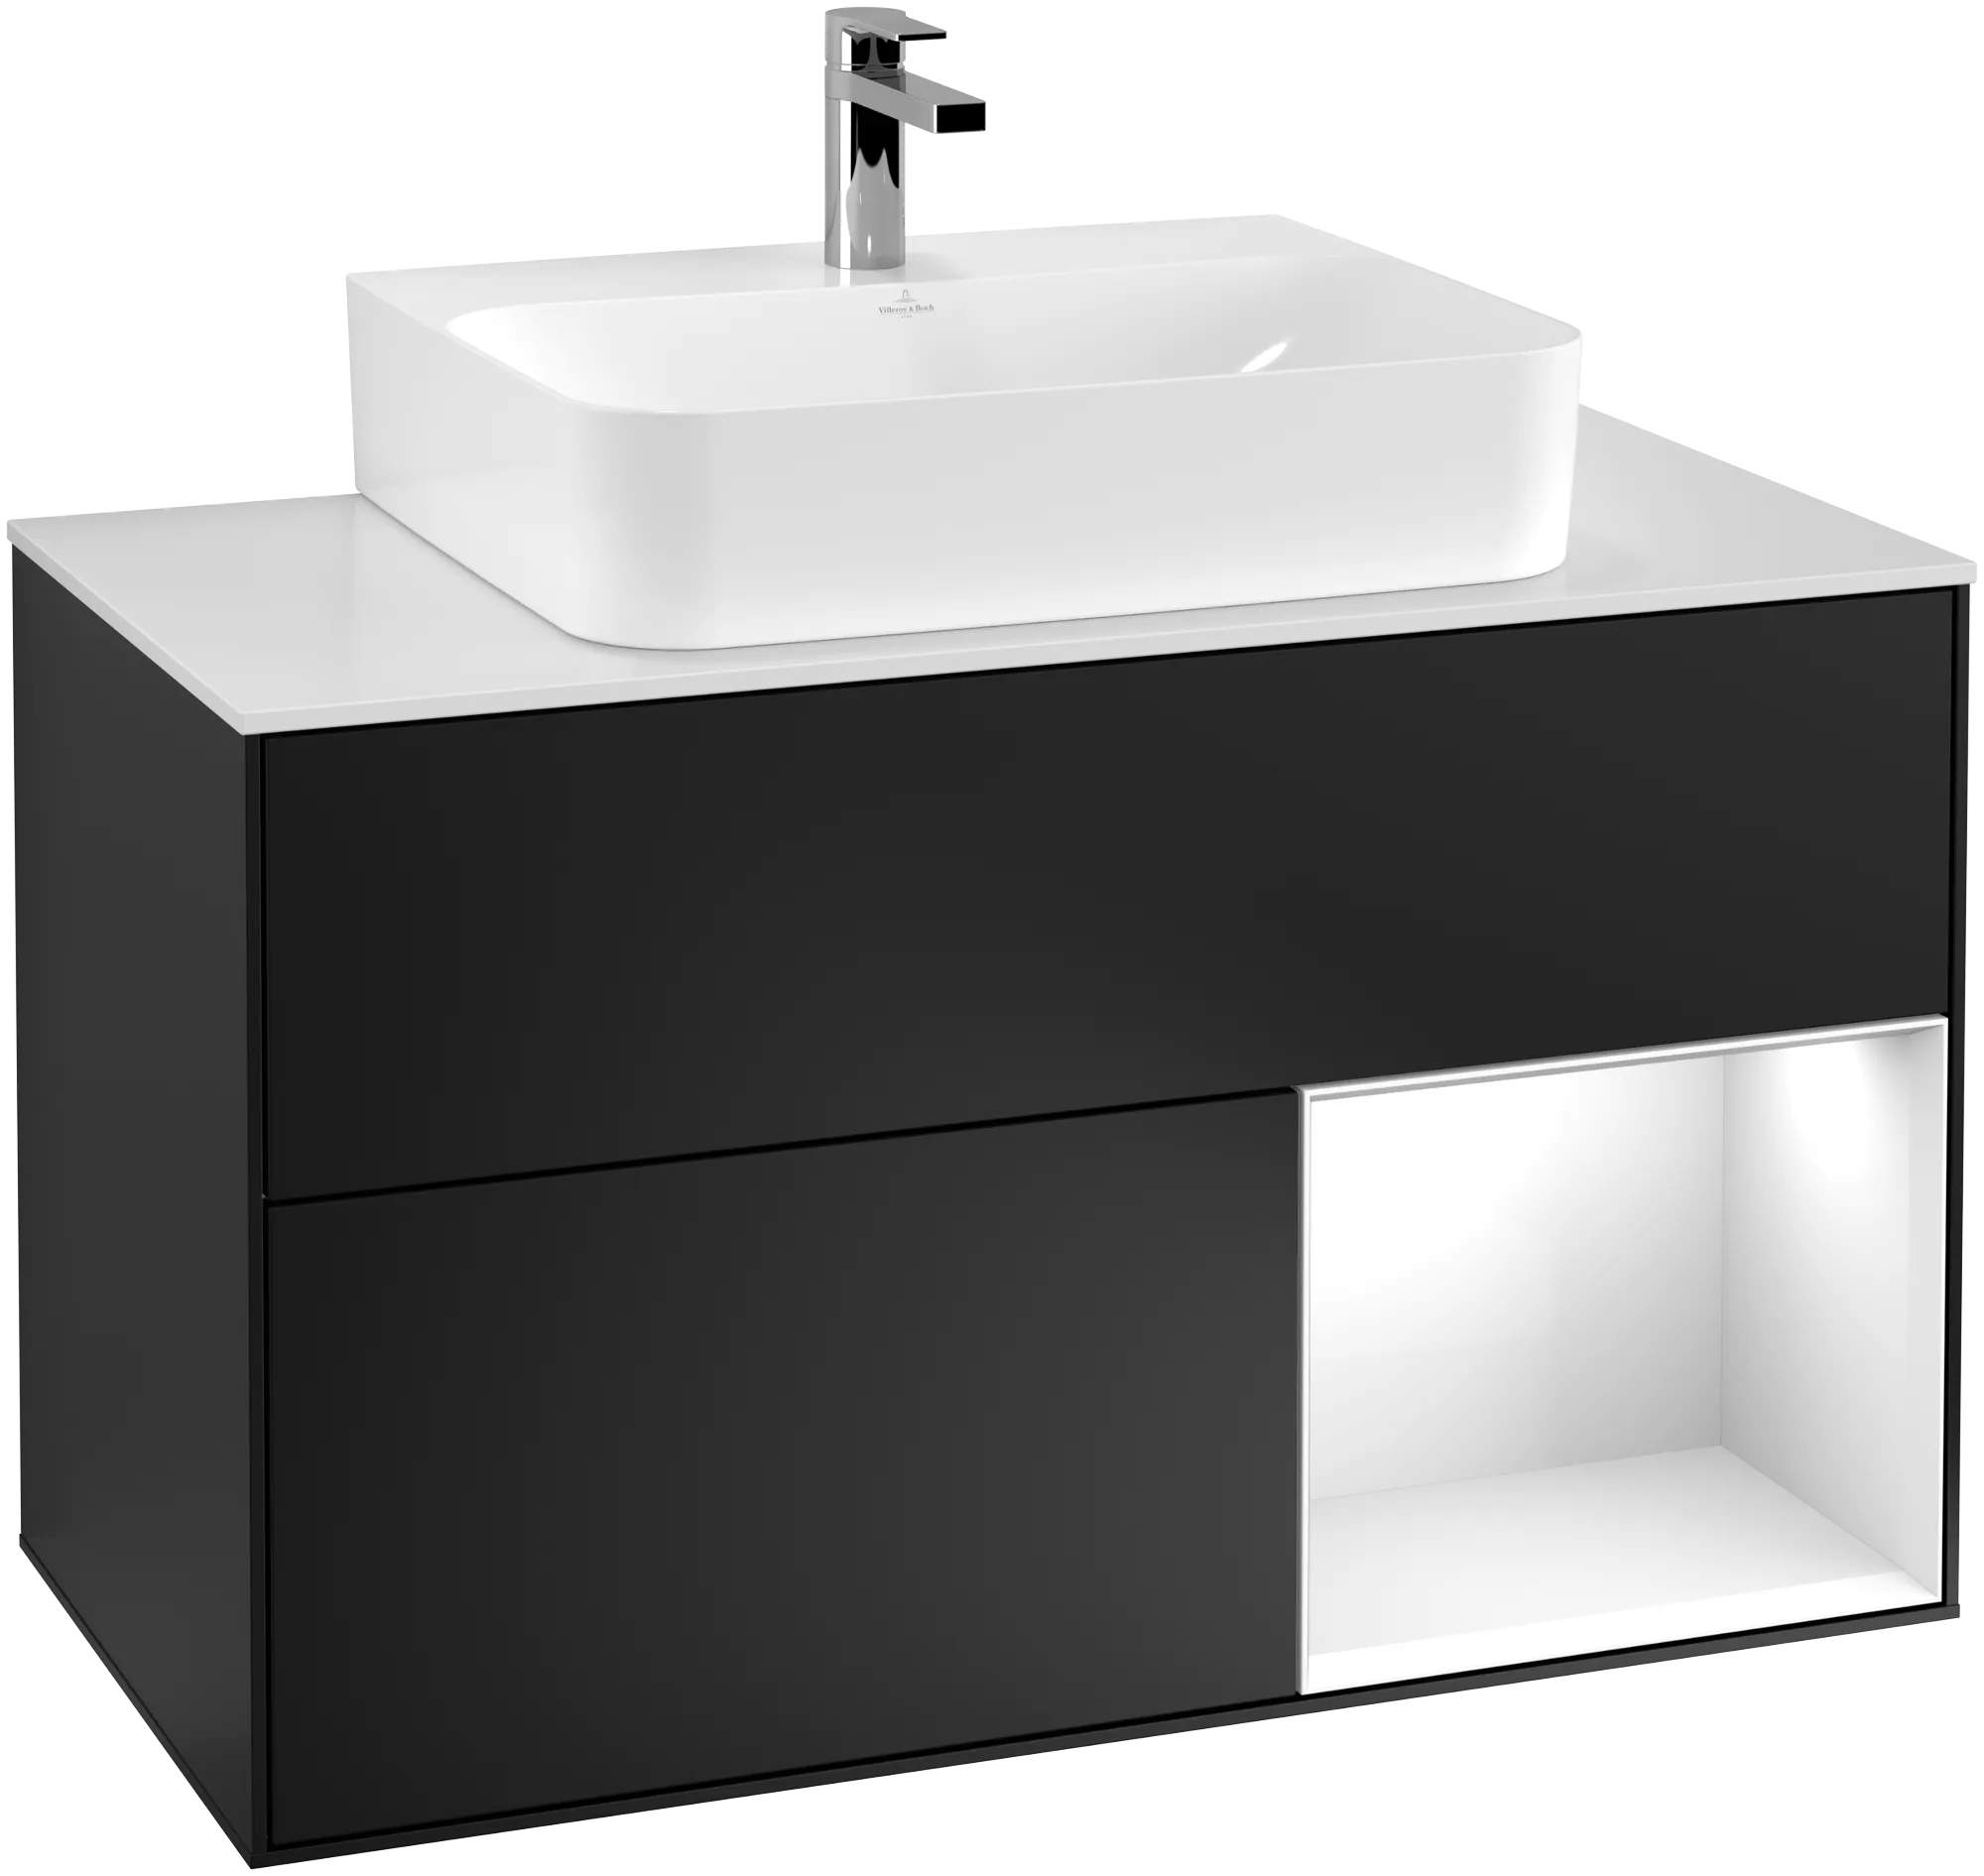 Obrázek VILLEROY BOCH Finion Vanity unit, with lighting, 2 pull-out compartments, 1000 x 603 x 501 mm, Black Matt Lacquer / Glossy White Lacquer / Glass White Matt #G121GFPD